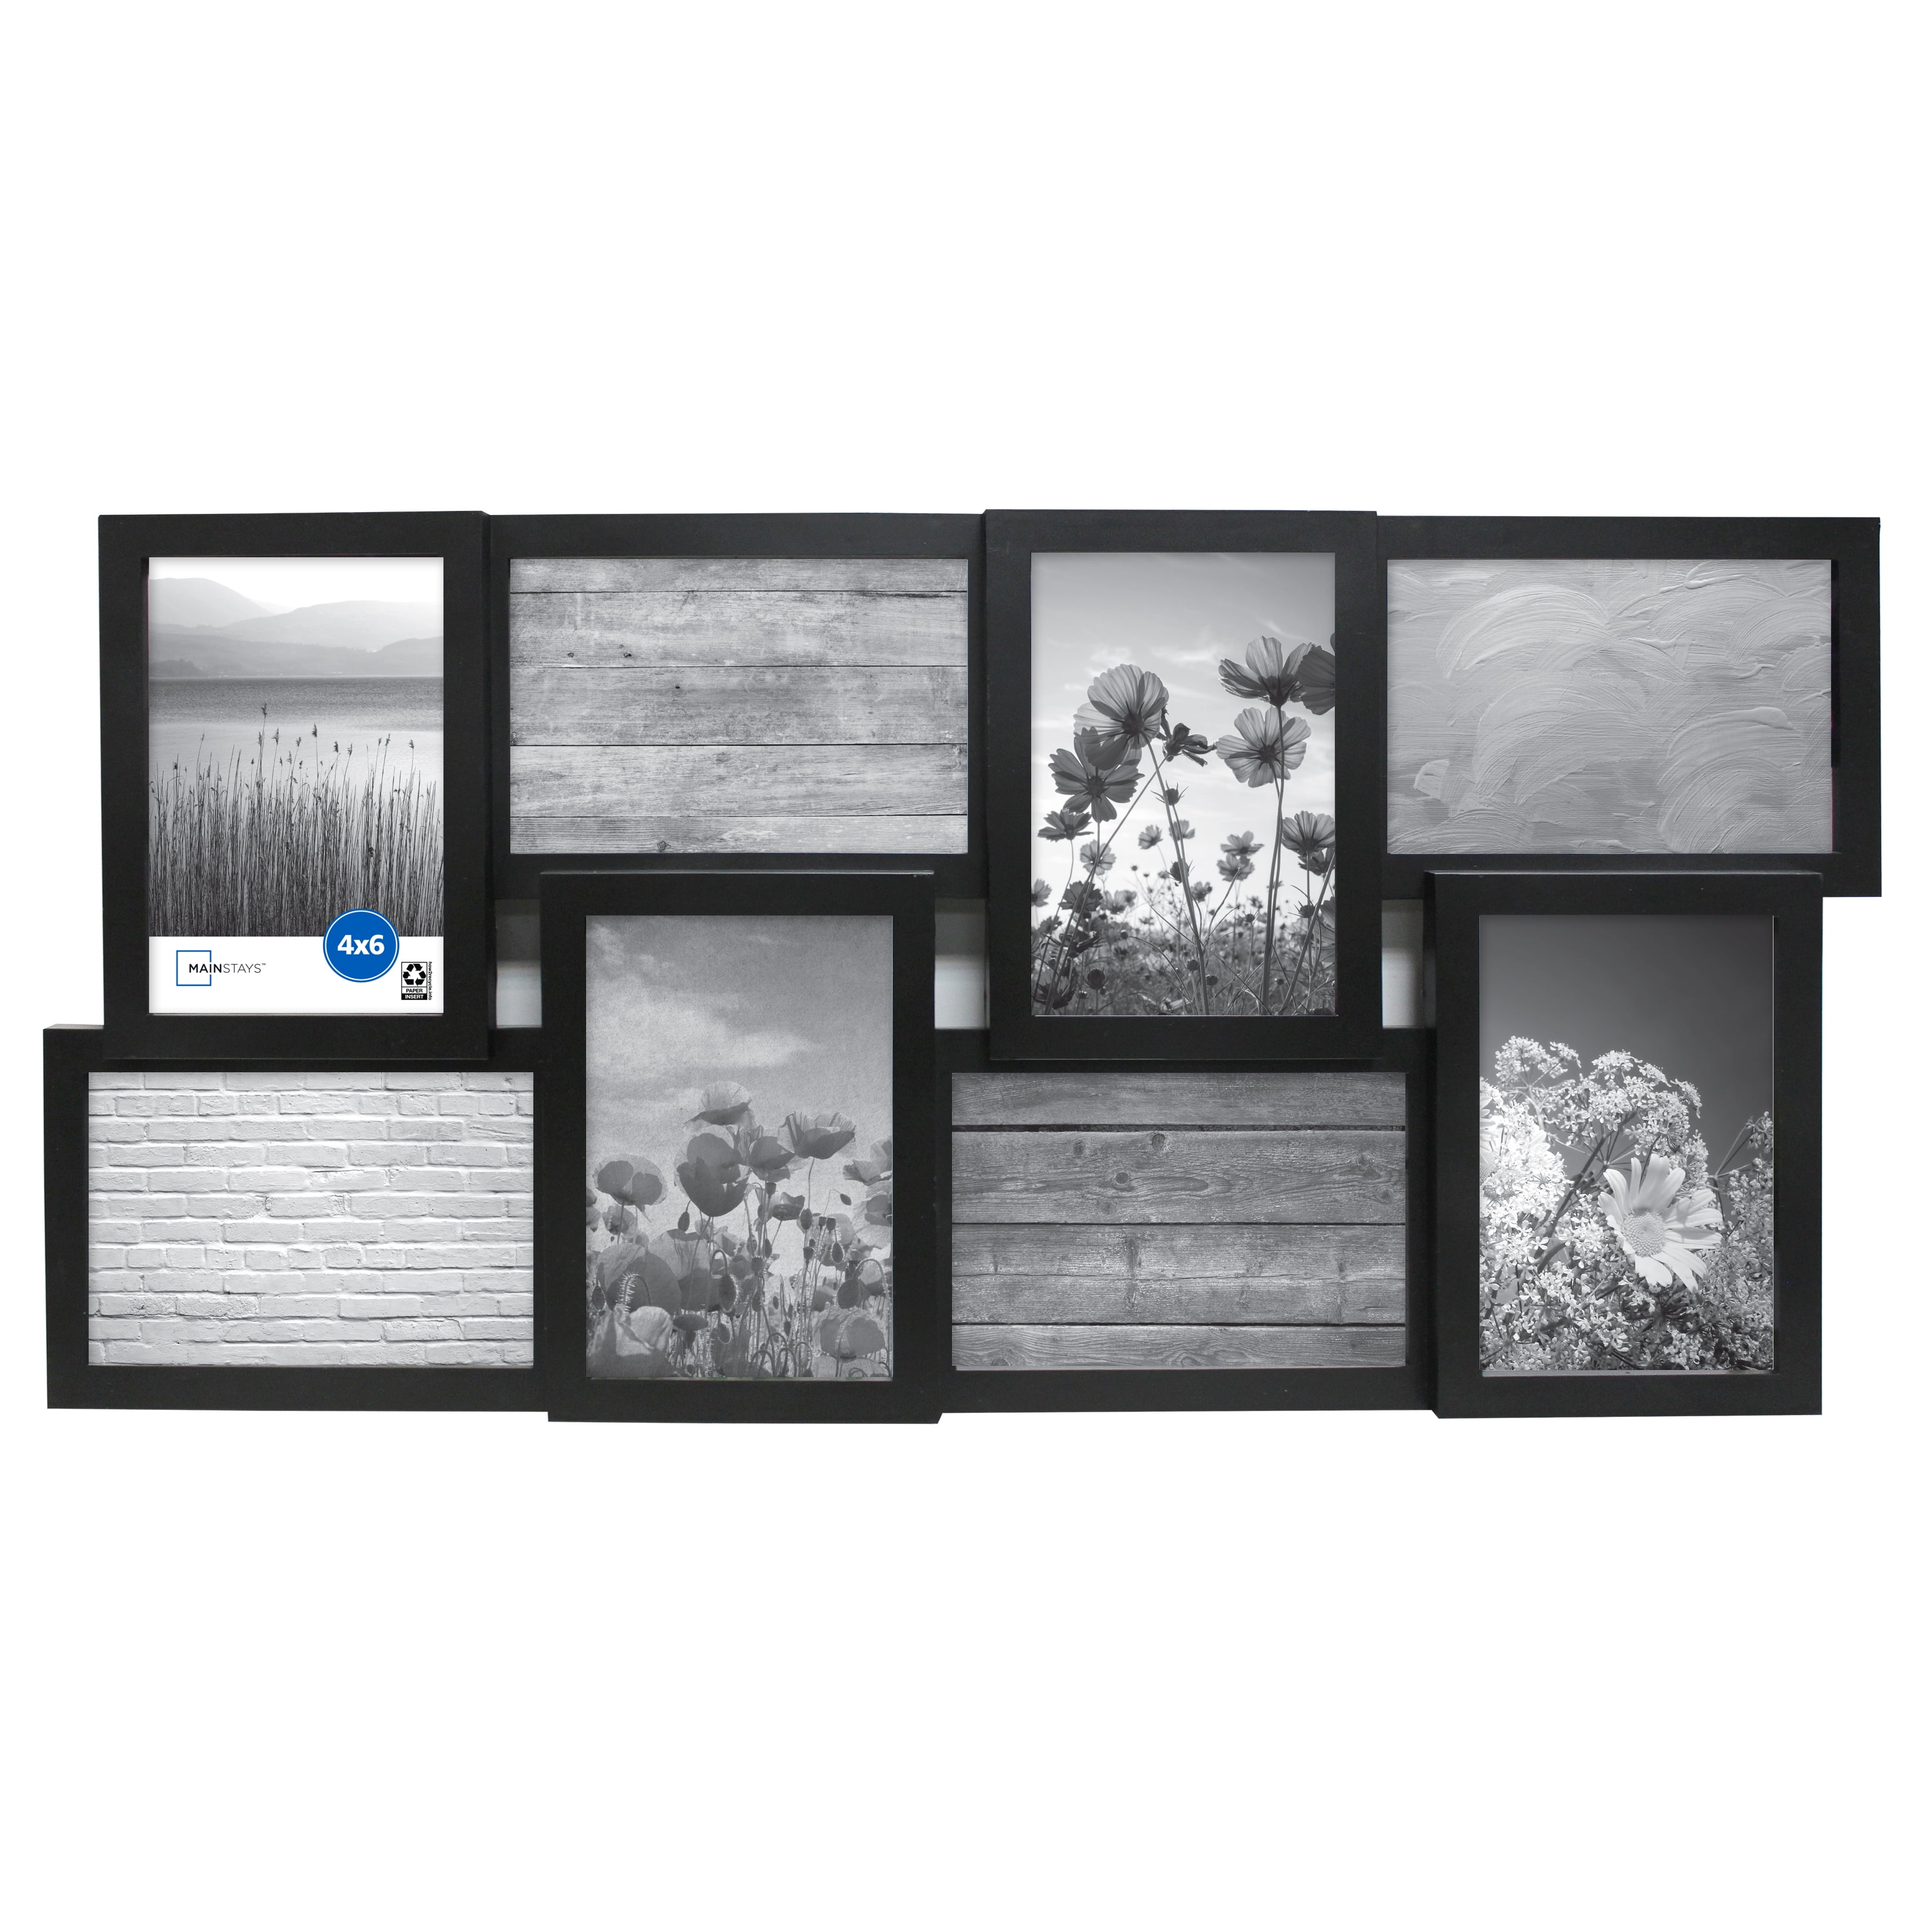 Mainstays 8-Opening 4x6 Linear Black Collage Picture Frame